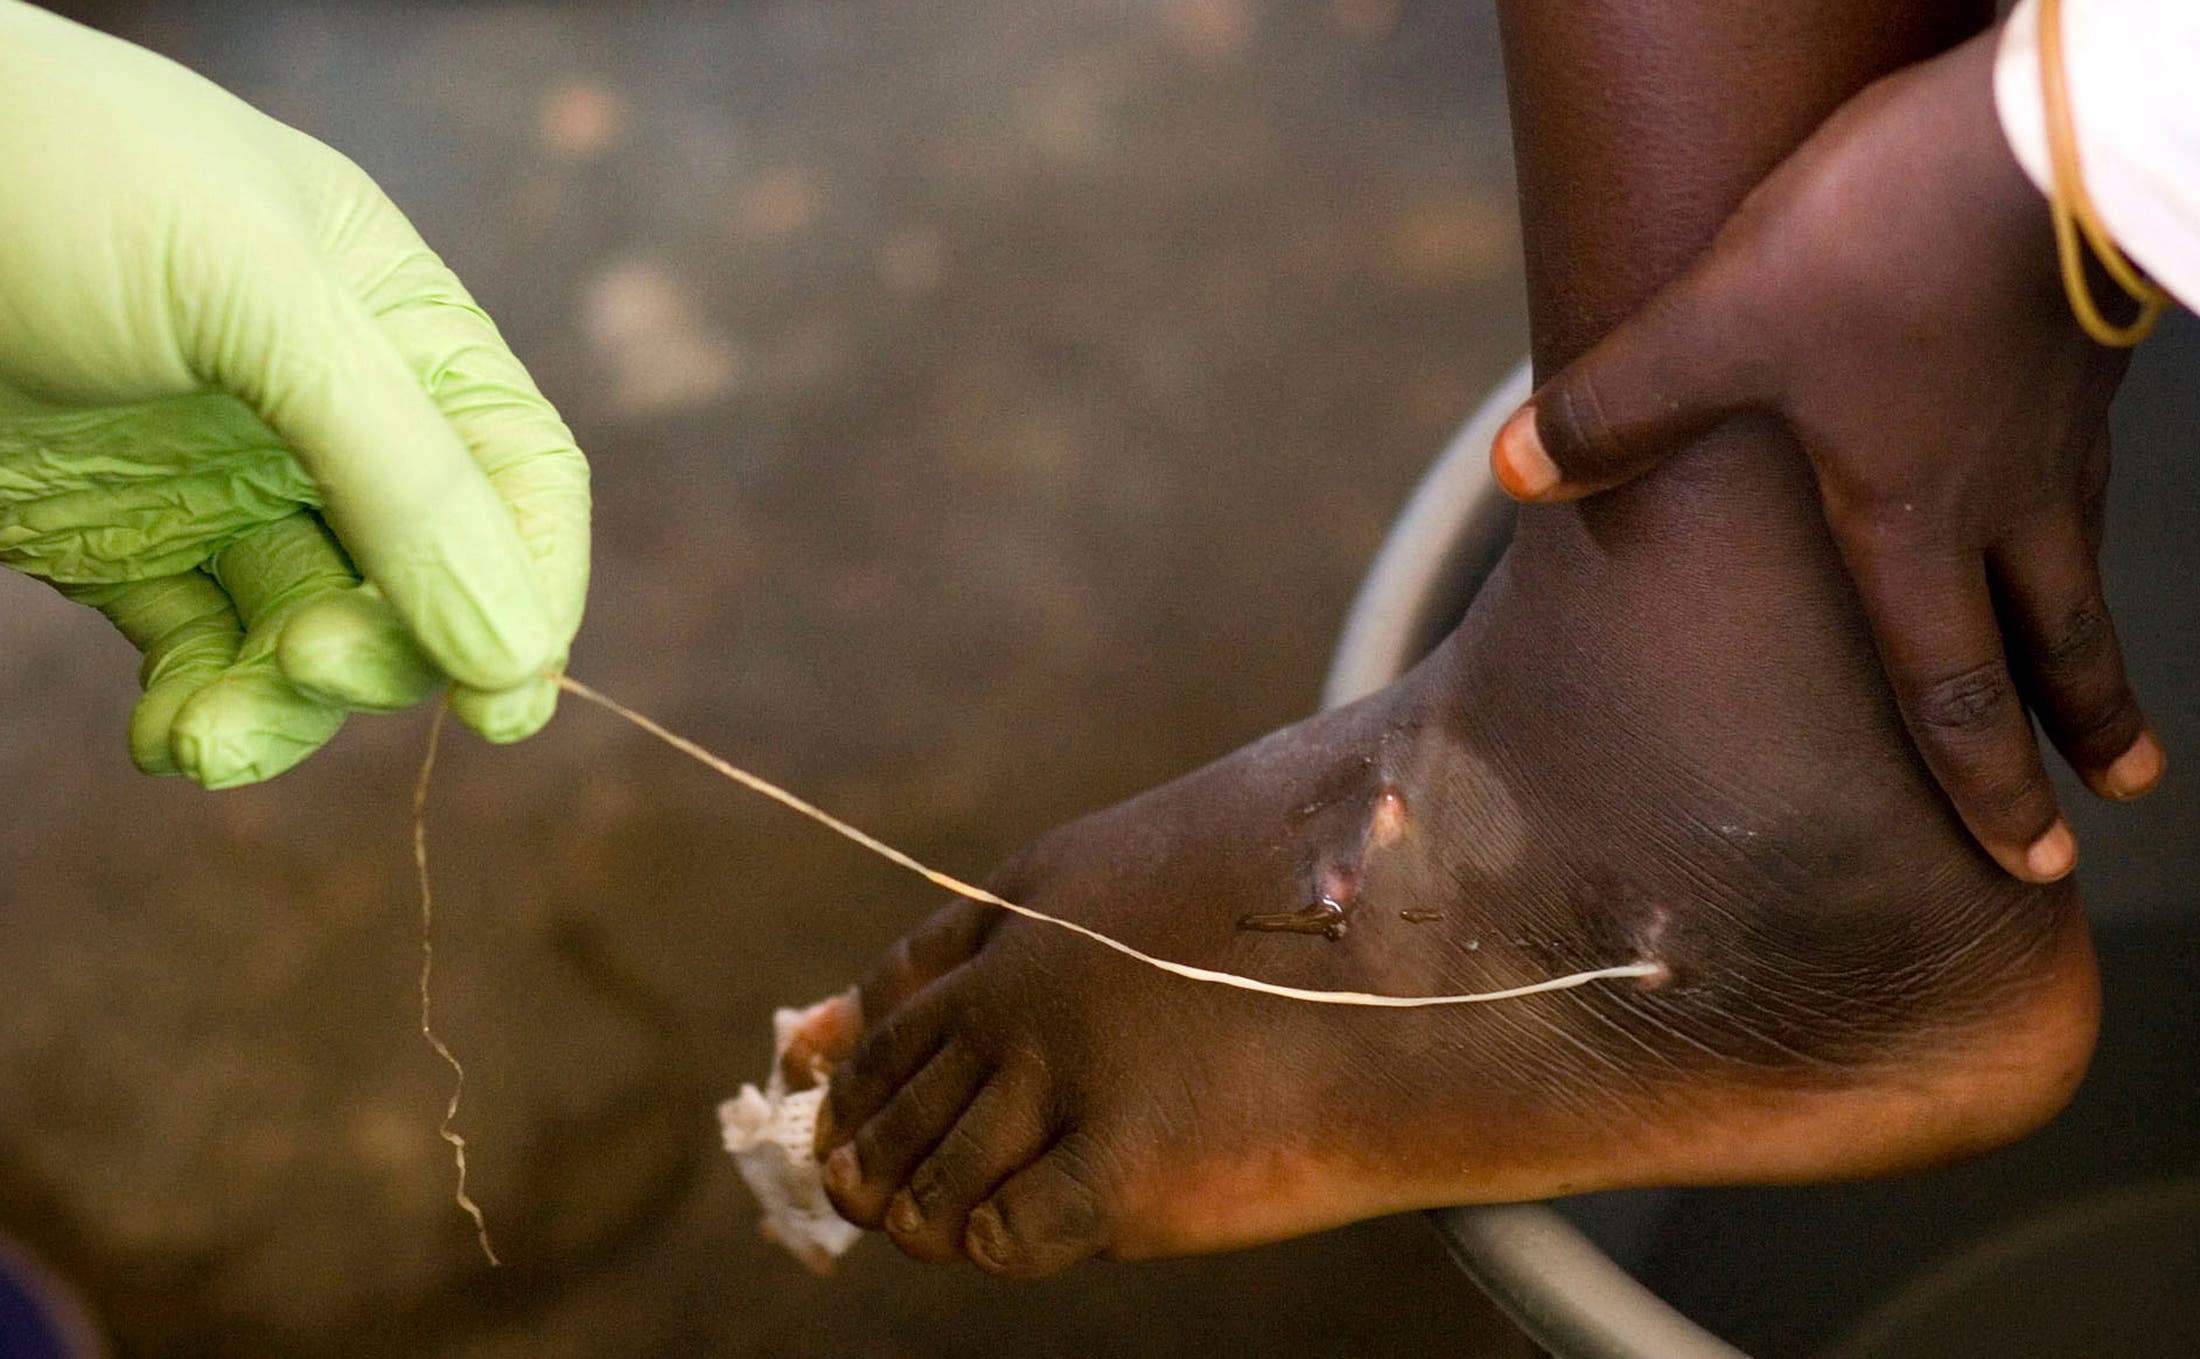 A Guinea worm extracted from a child’s foot in Ghana in 2007. (File photo: AP)